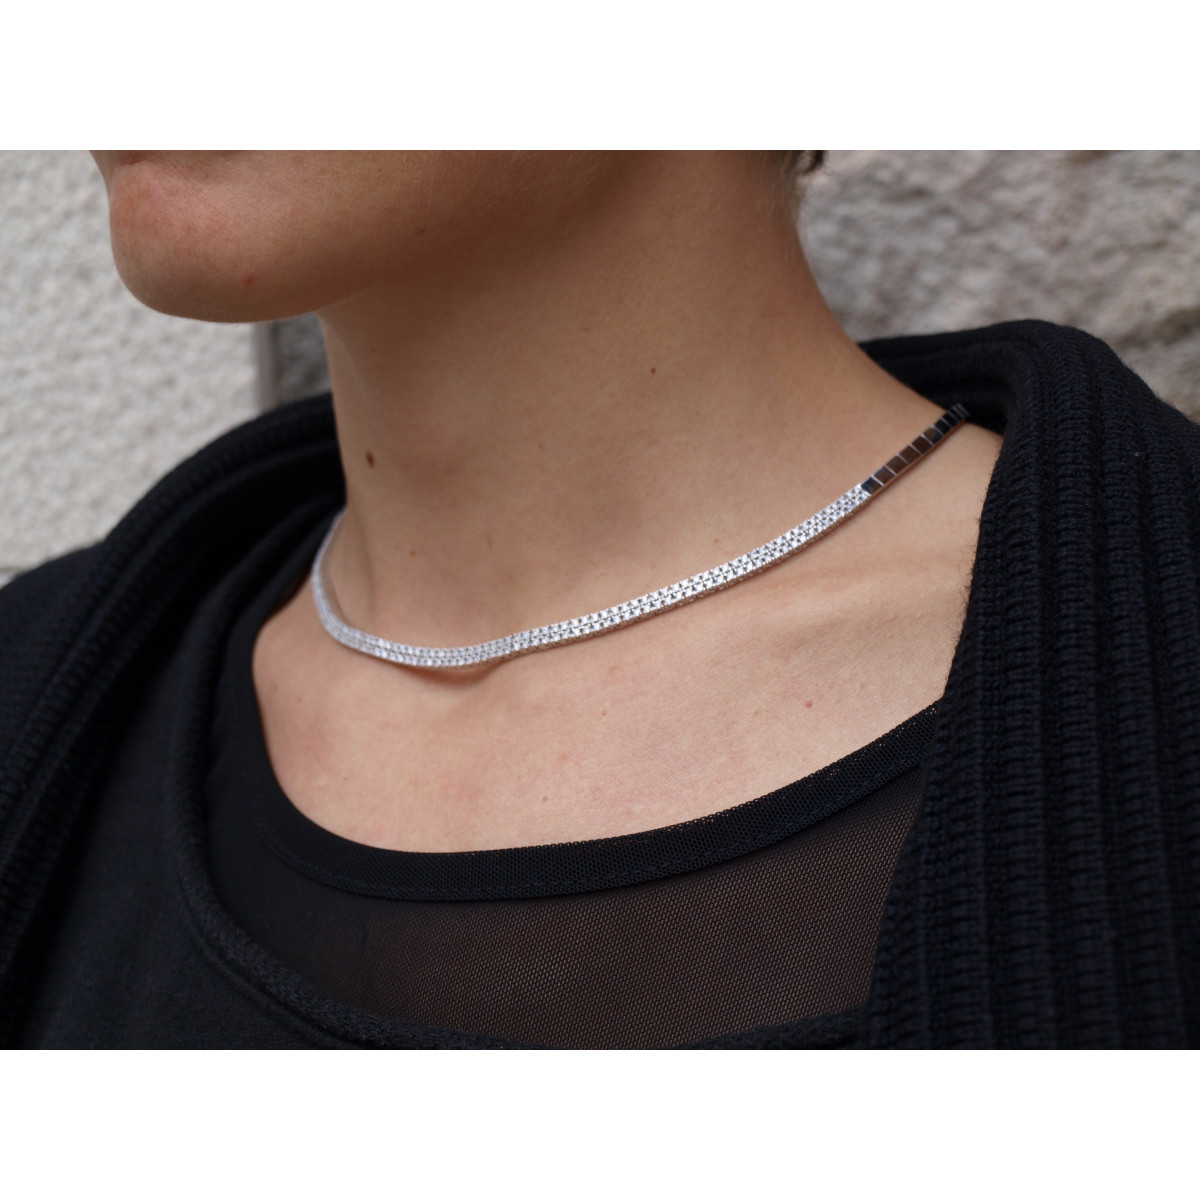 RIVIERE LINEARGENT NECKLACE - 11648-C